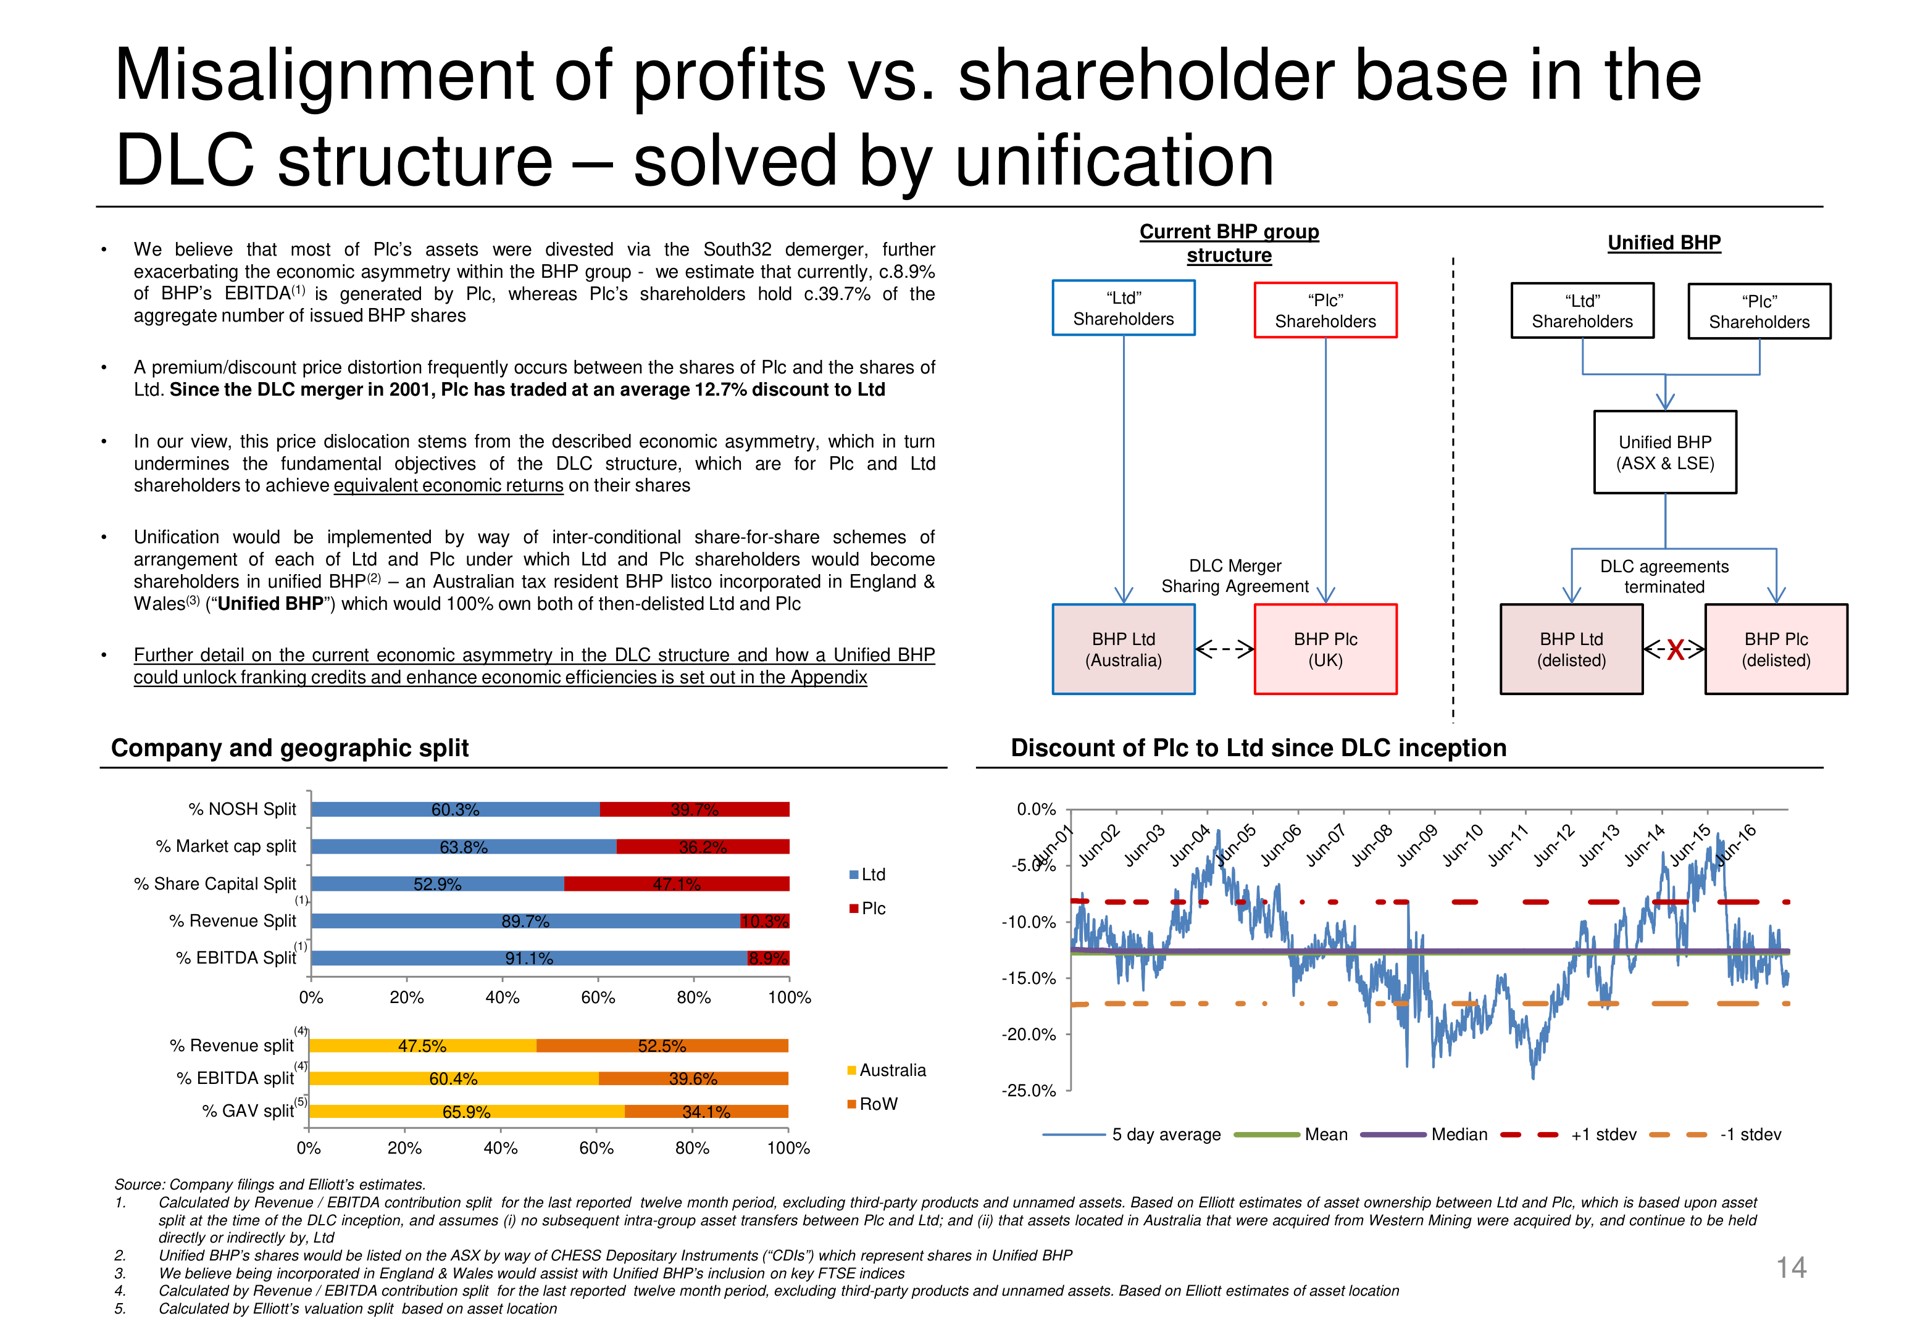 misalignment of profits shareholder base in the structure solved by unification | Elliott Management